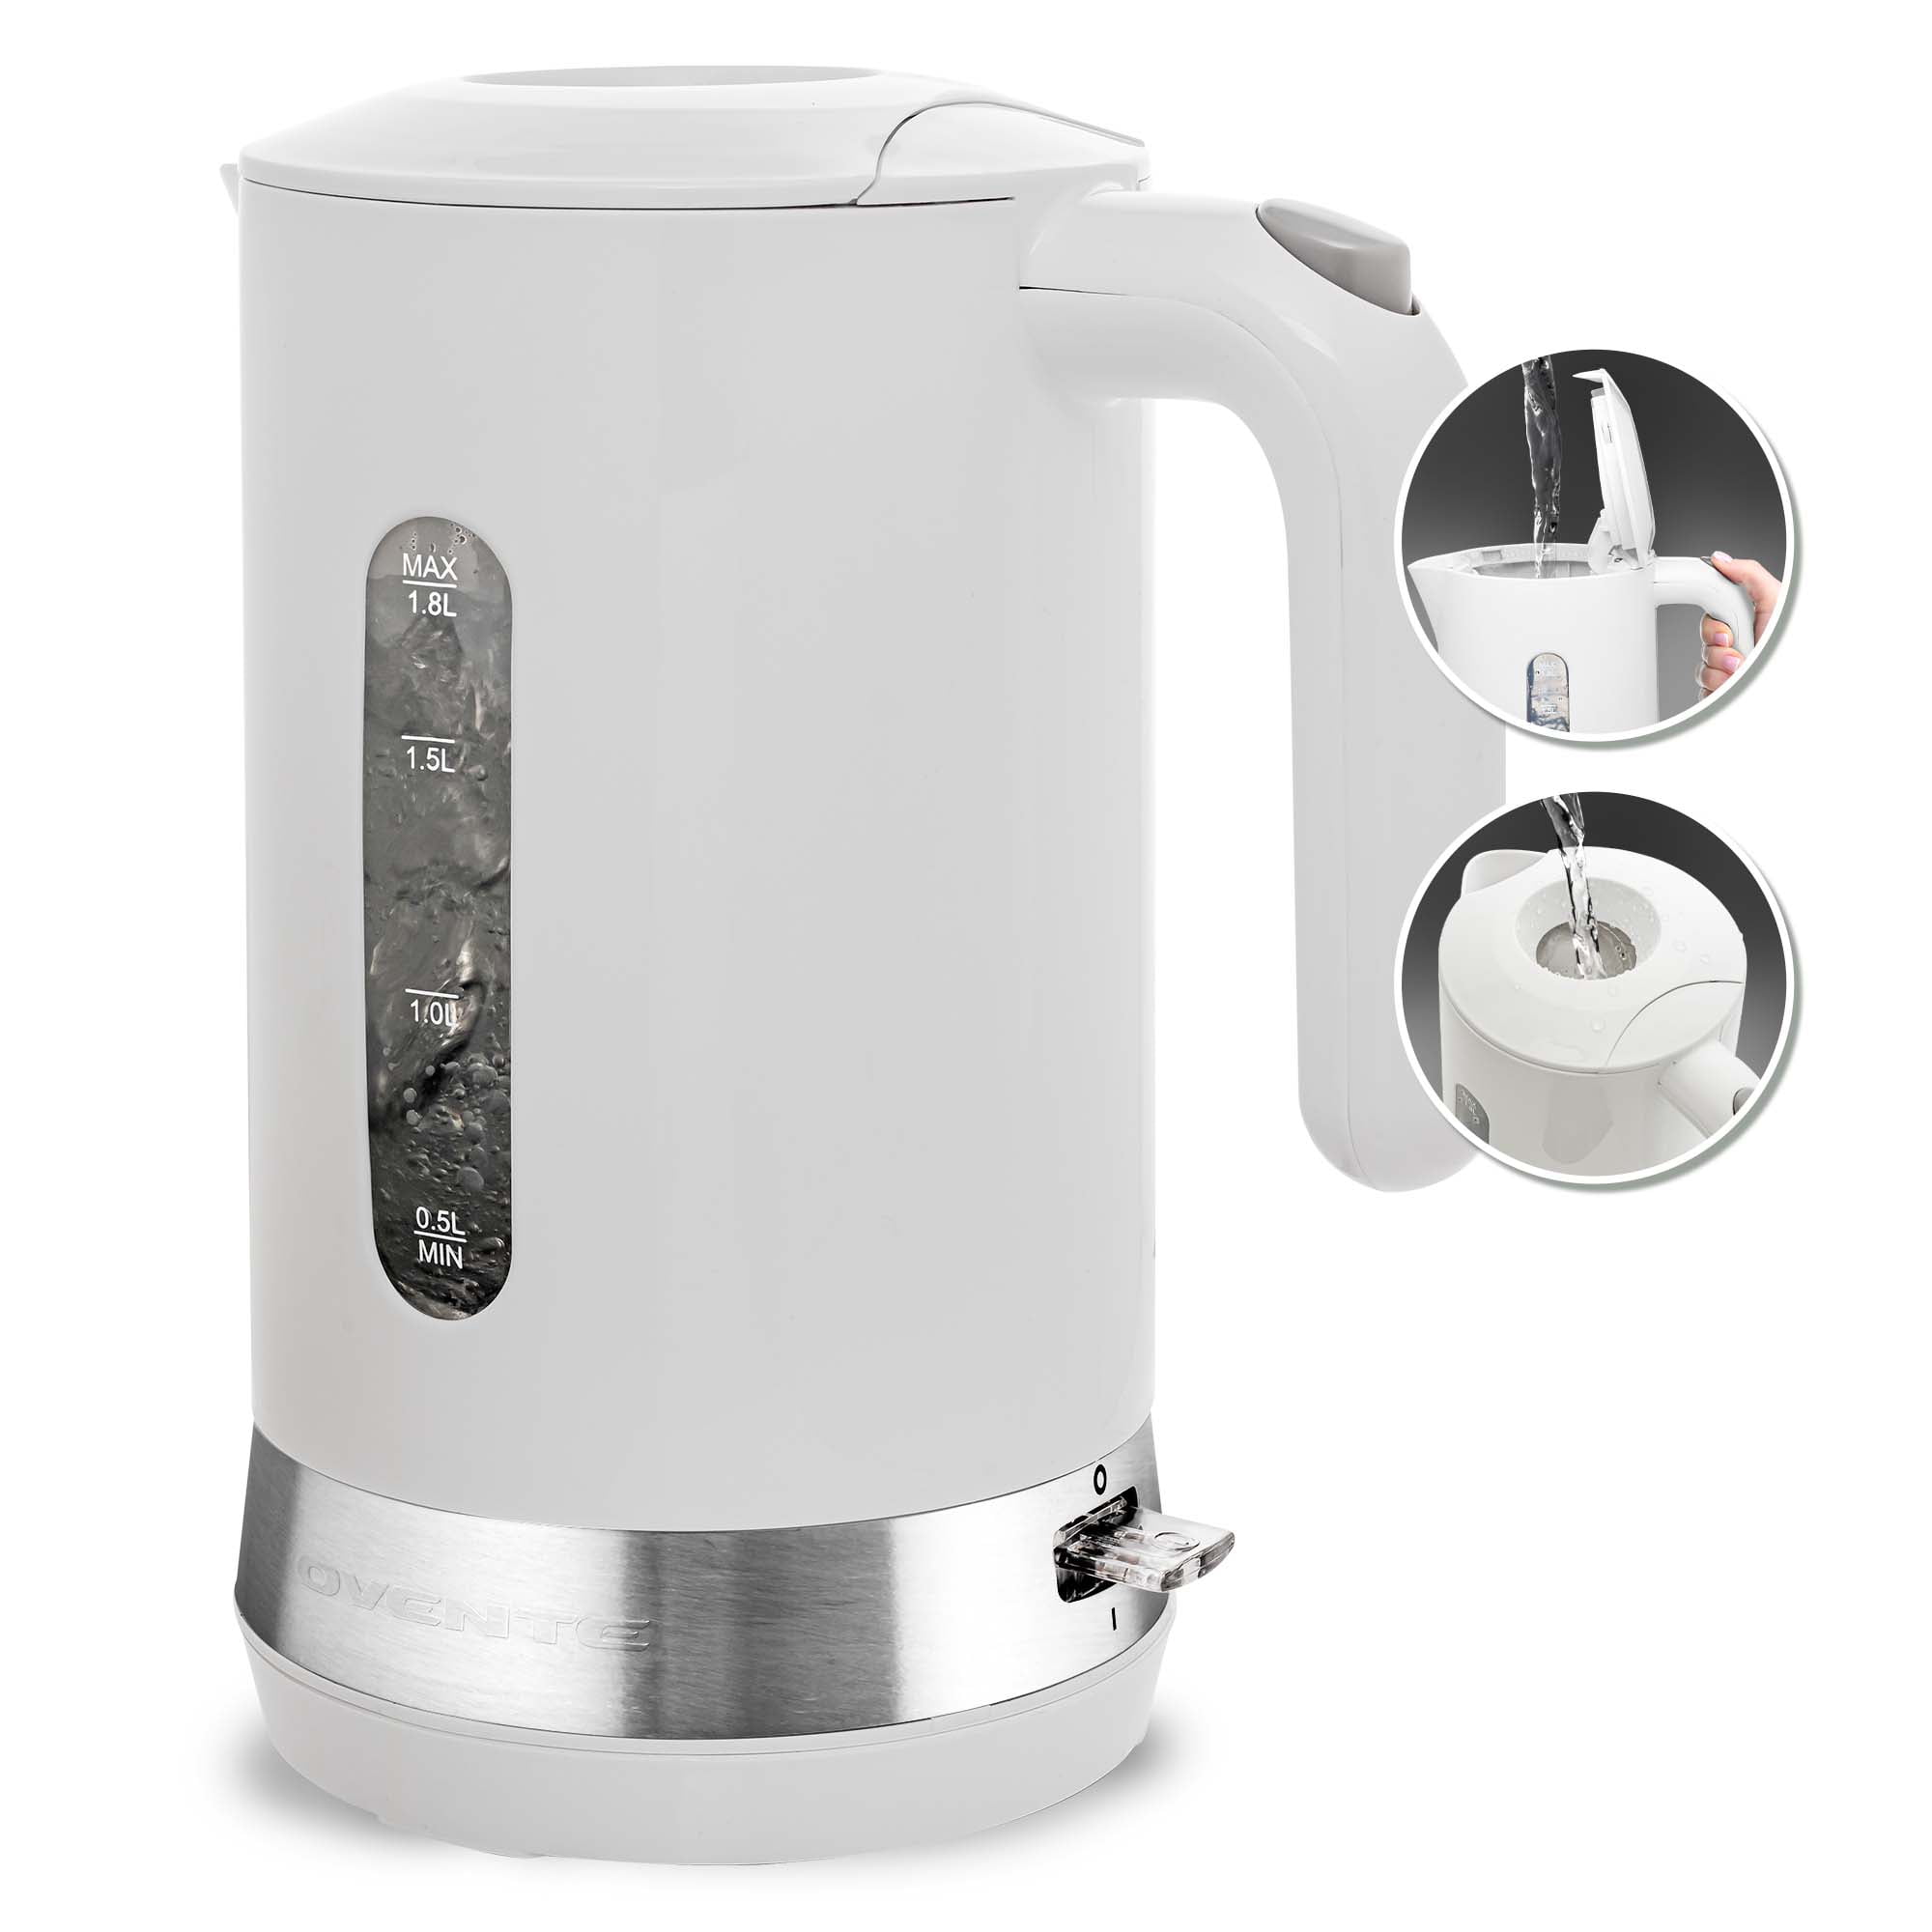 OVENTE 1.8 L Electric Kettle Hot Water Heater, Auto Shutoff, Instant Boiler  for Coffee -White KP413W 